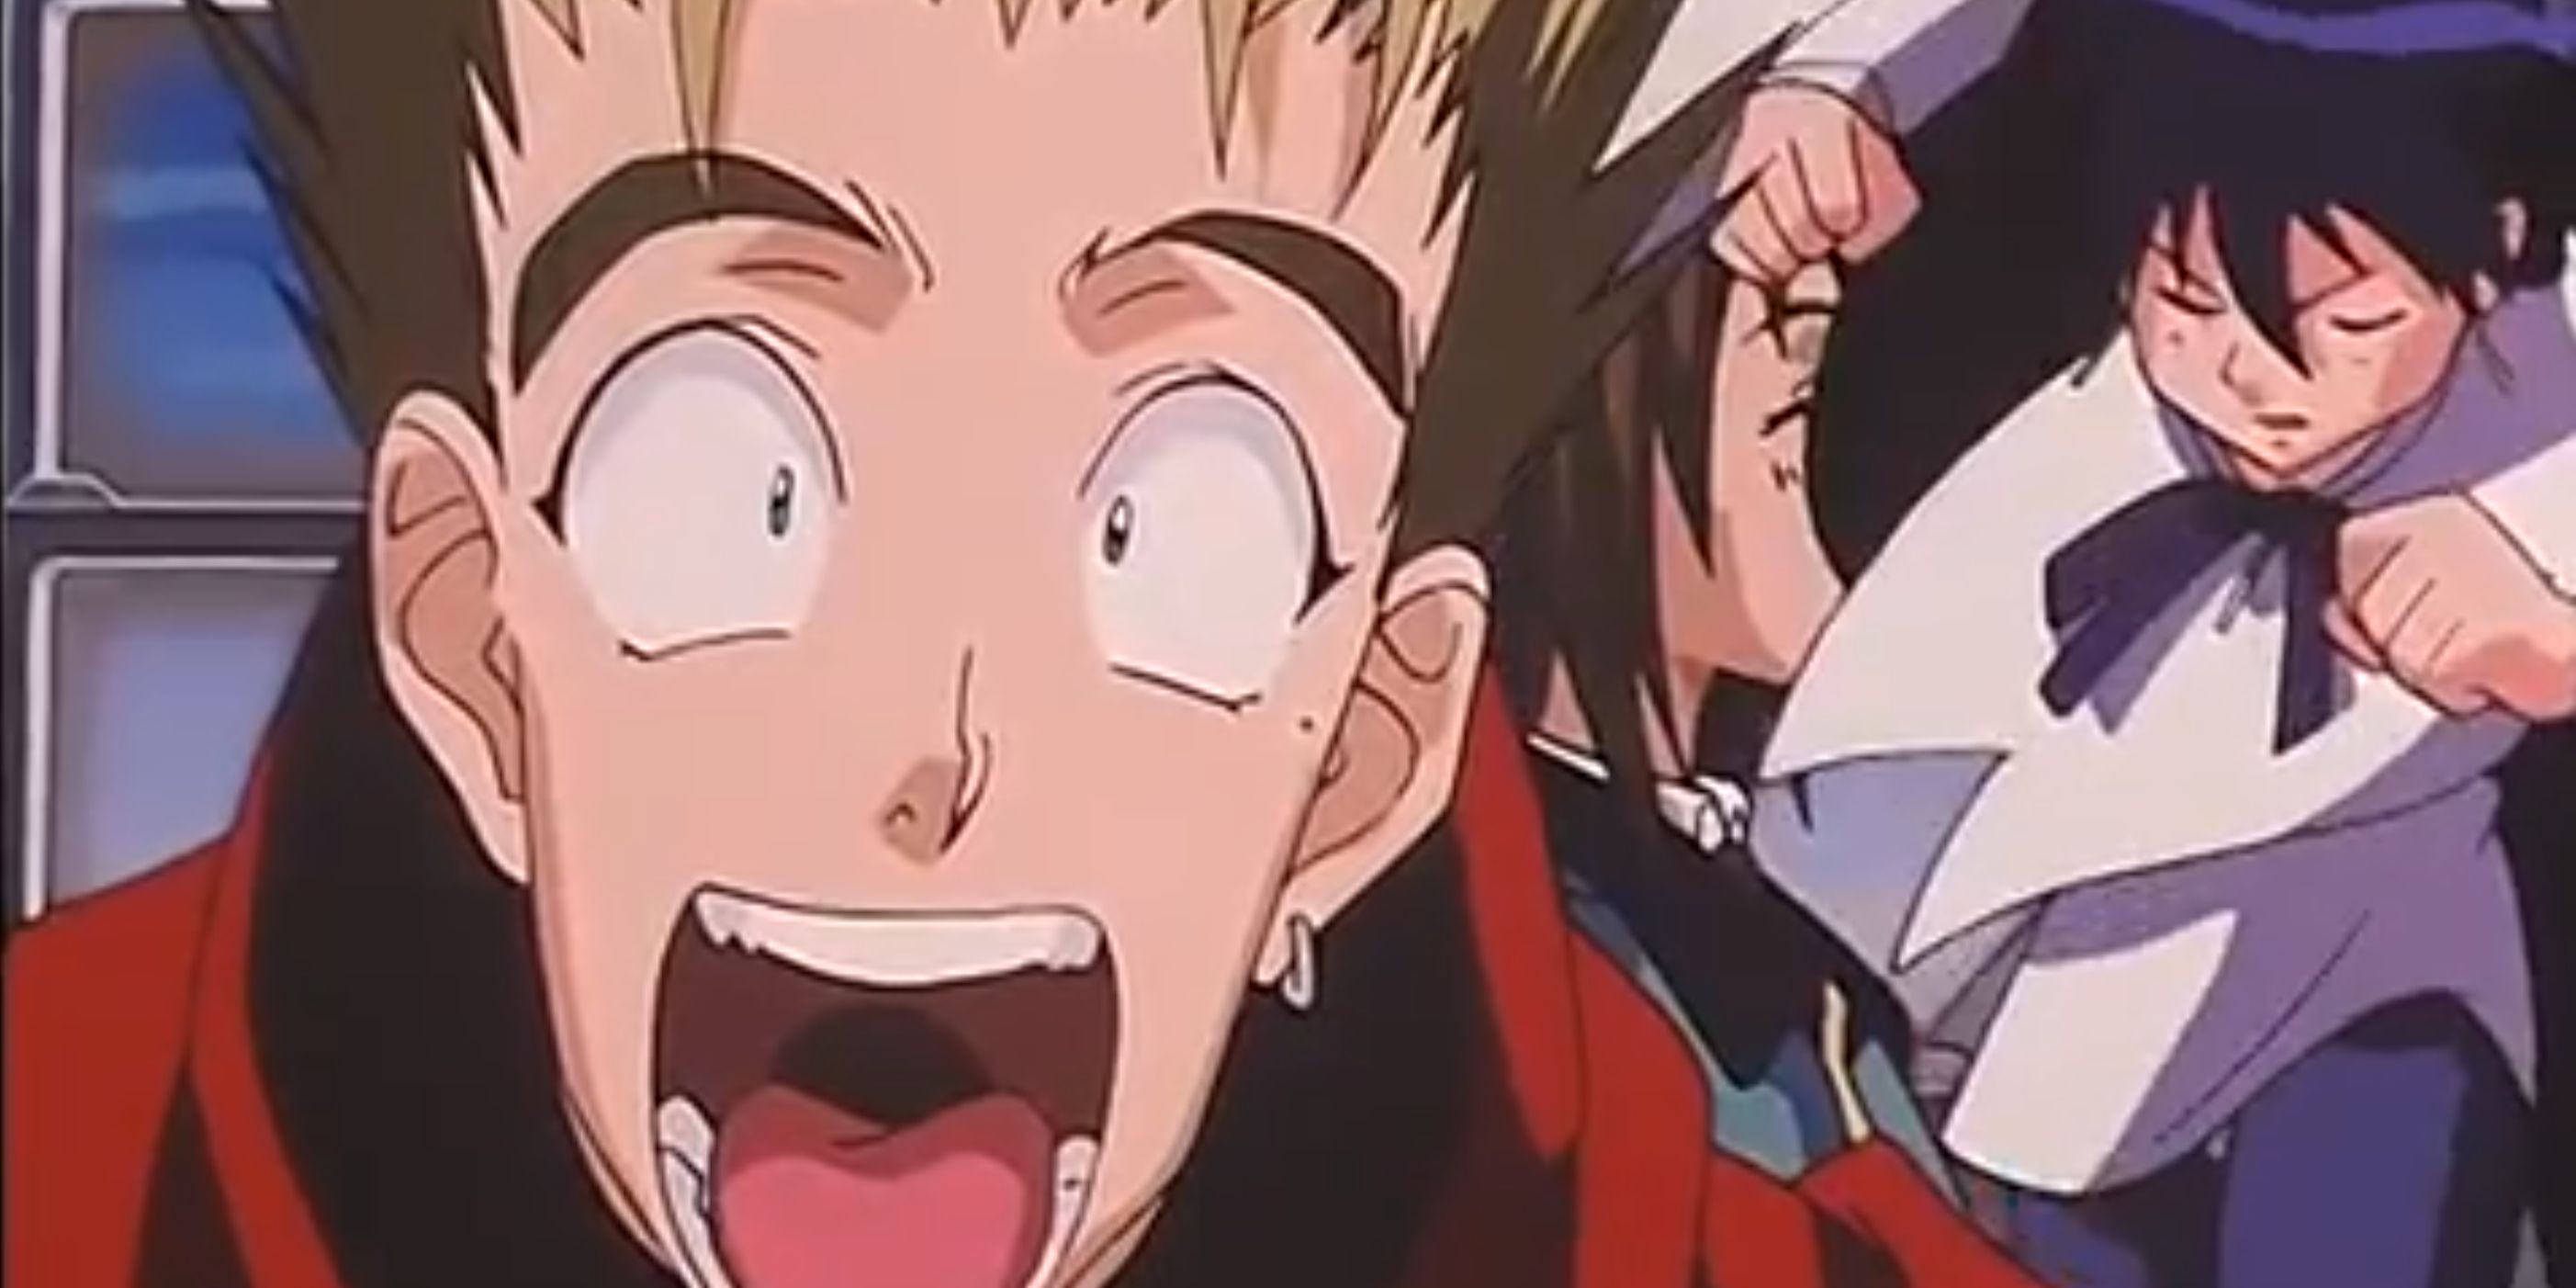 Vash, Milly and Meryl from Trigun in a bus